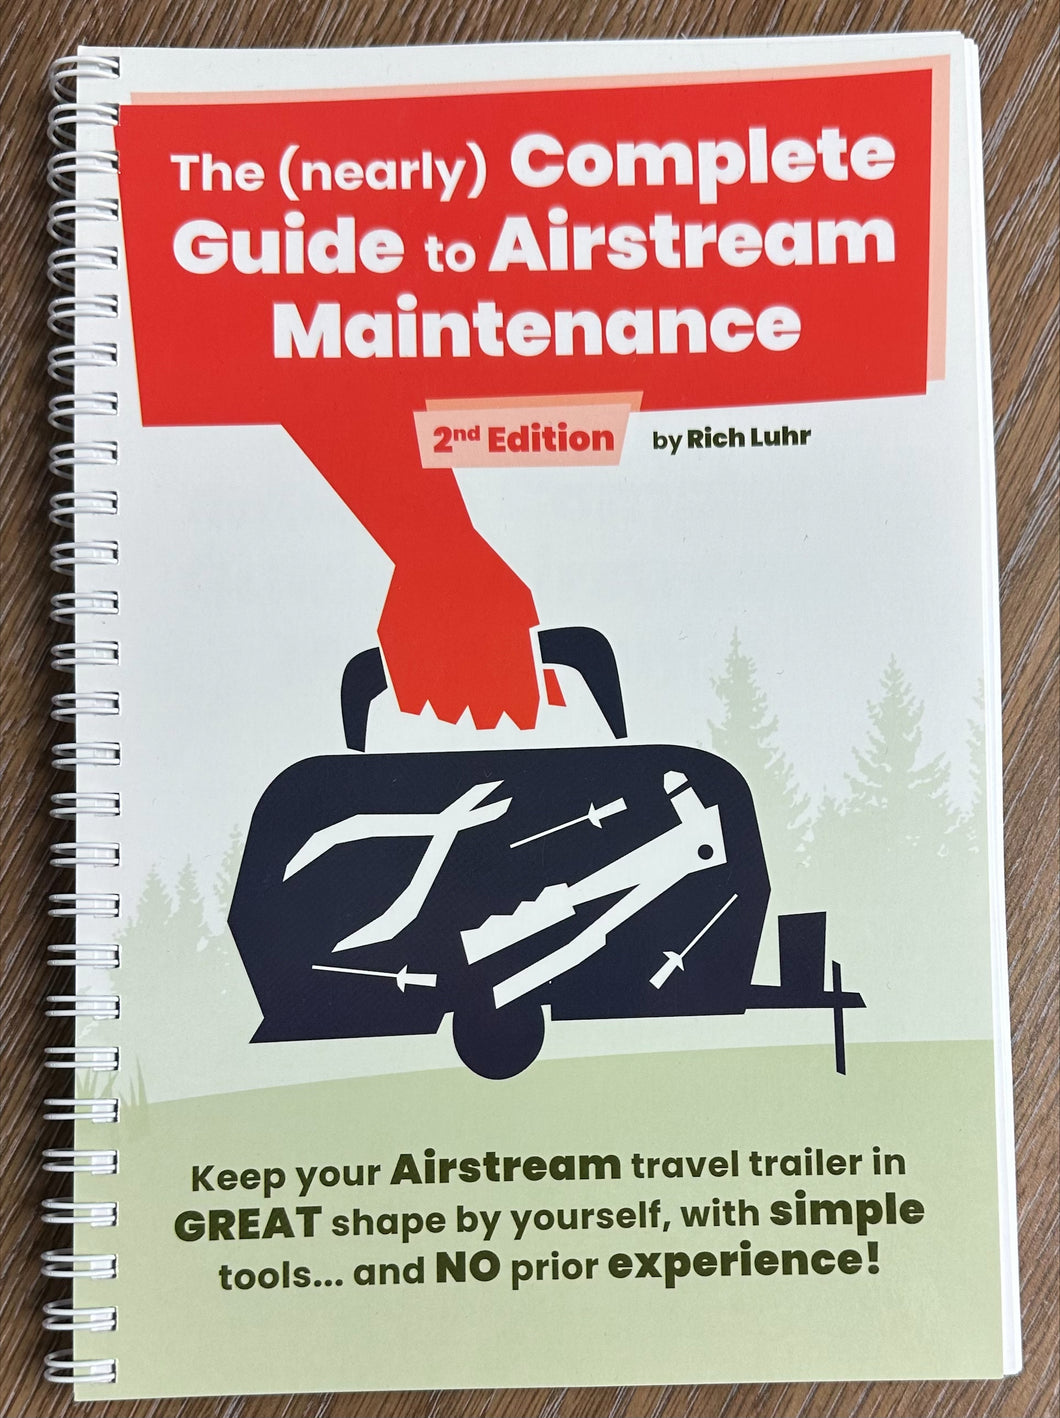 The (nearly) Complete Guide to Airstream Maintenance